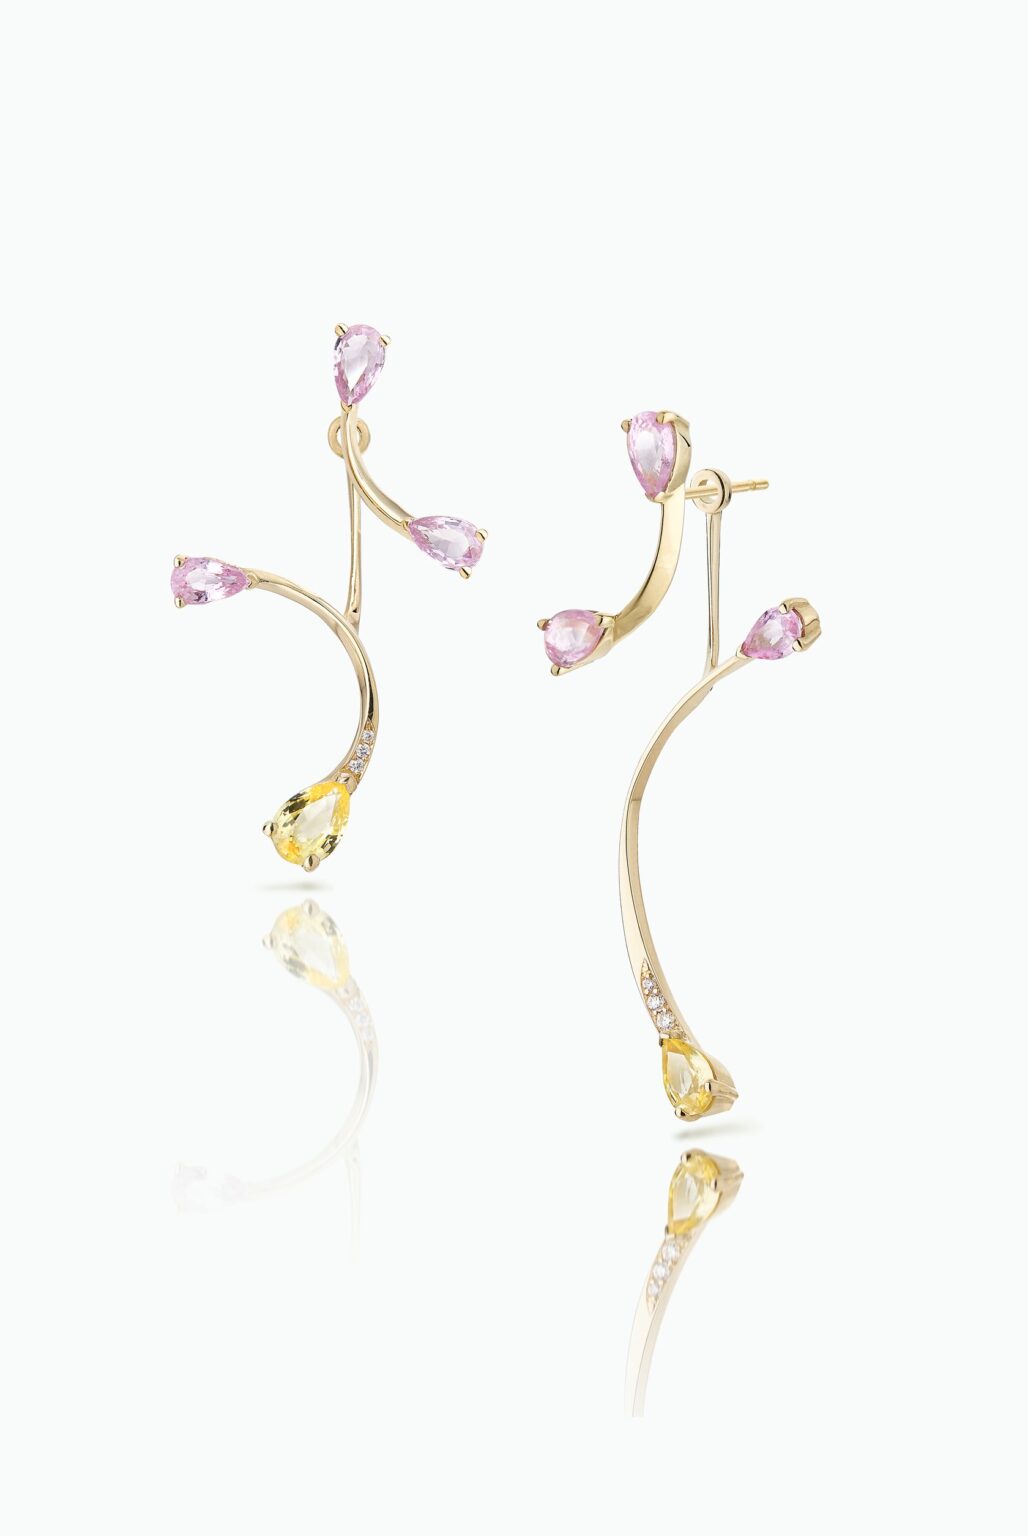 ROSE MORE EAR JACKETS & PINK FLARE STUDS - Sapphire, Diamond & 18K Gold ...